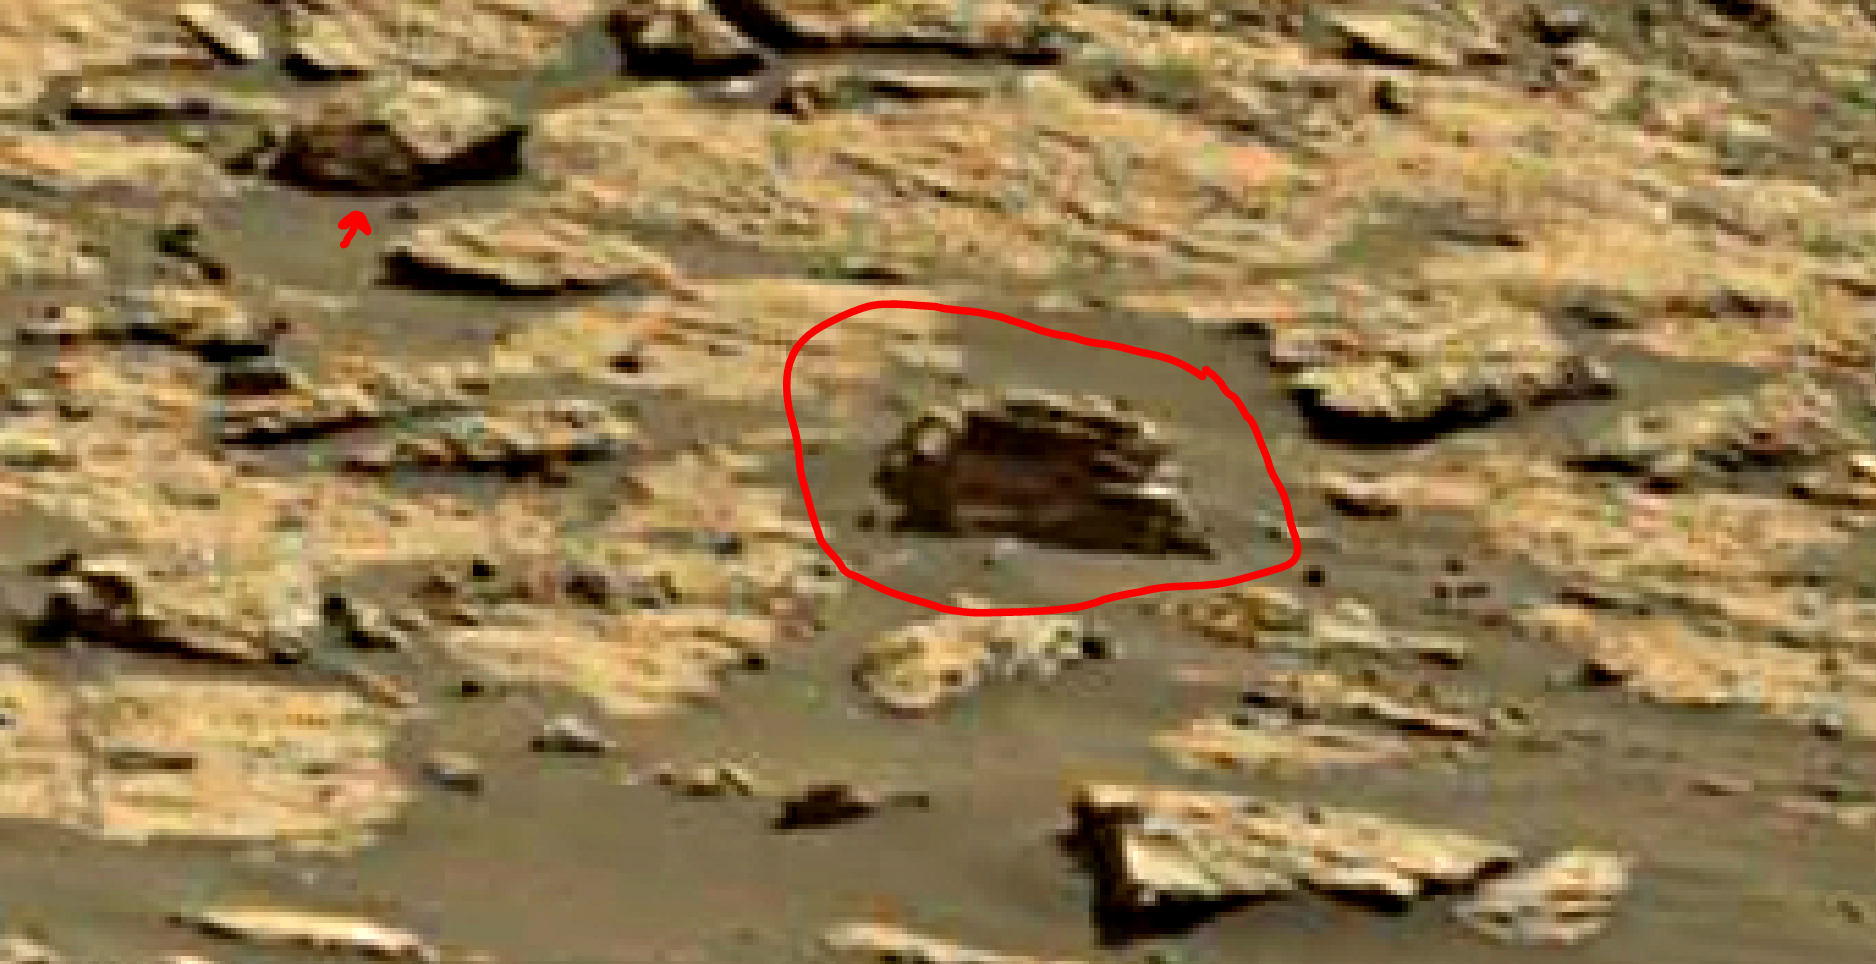 mars sol 1435 anomaly artifacts 1-1a was life on mars